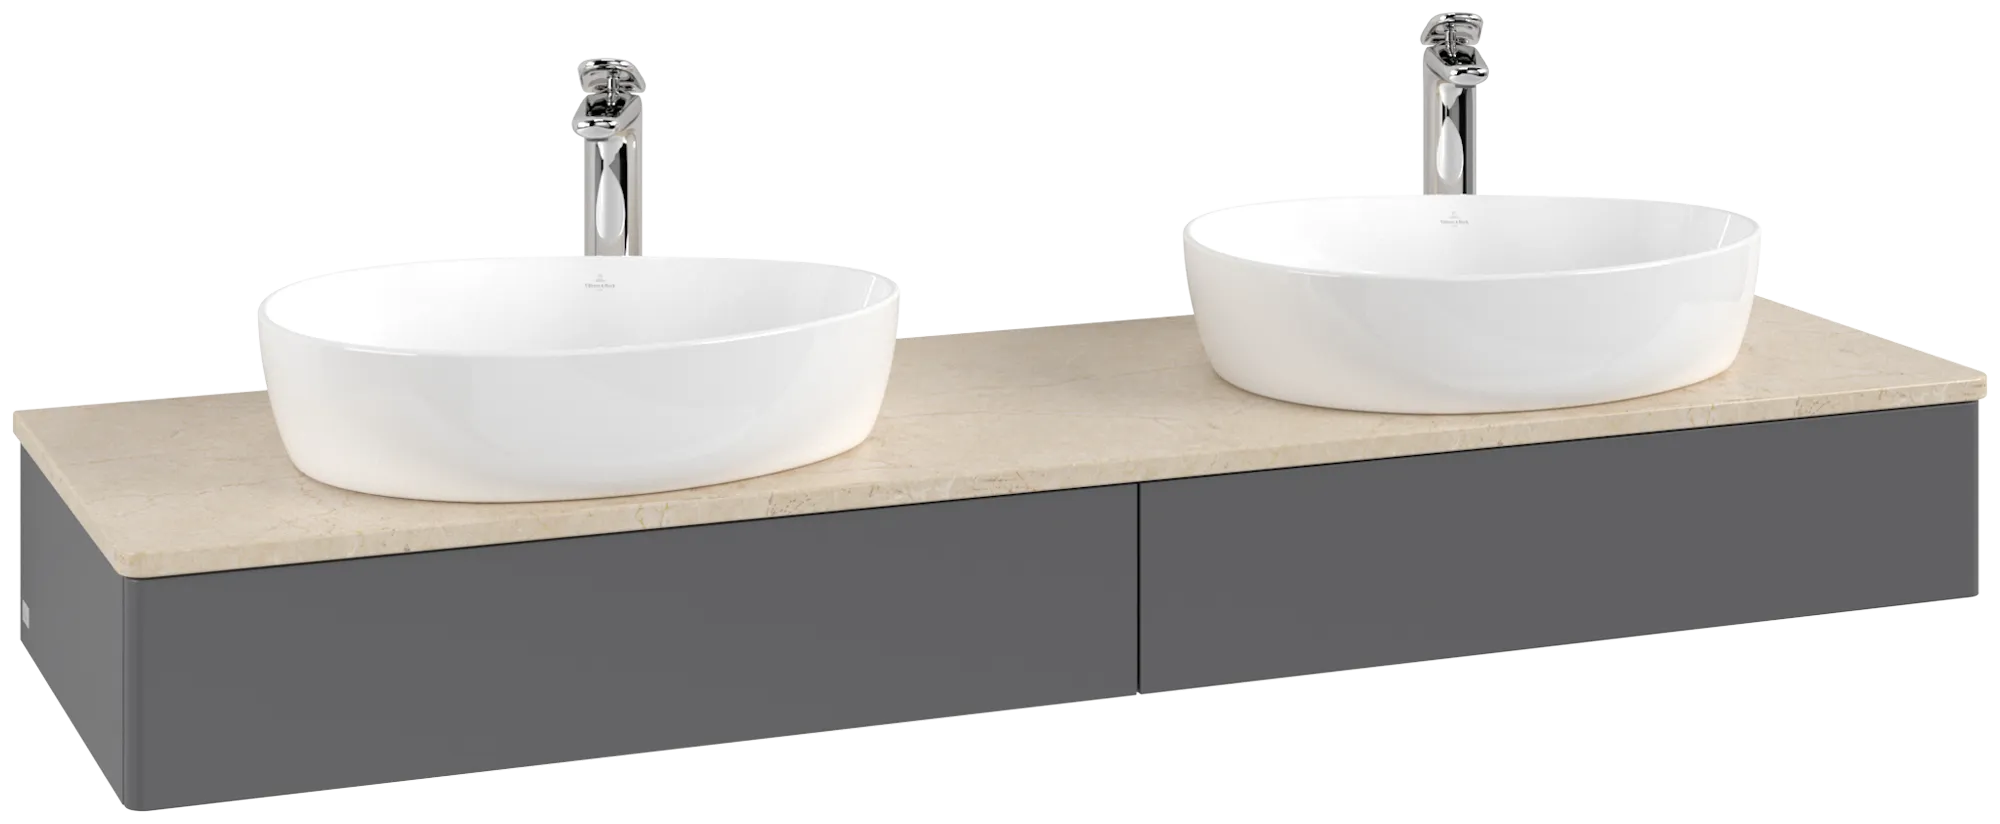 VILLEROY BOCH Antao Vanity unit, 2 pull-out compartments, 1600 x 190 x 500 mm, Front without structure, Anthracite Matt Lacquer / Botticino #K17053GK resmi